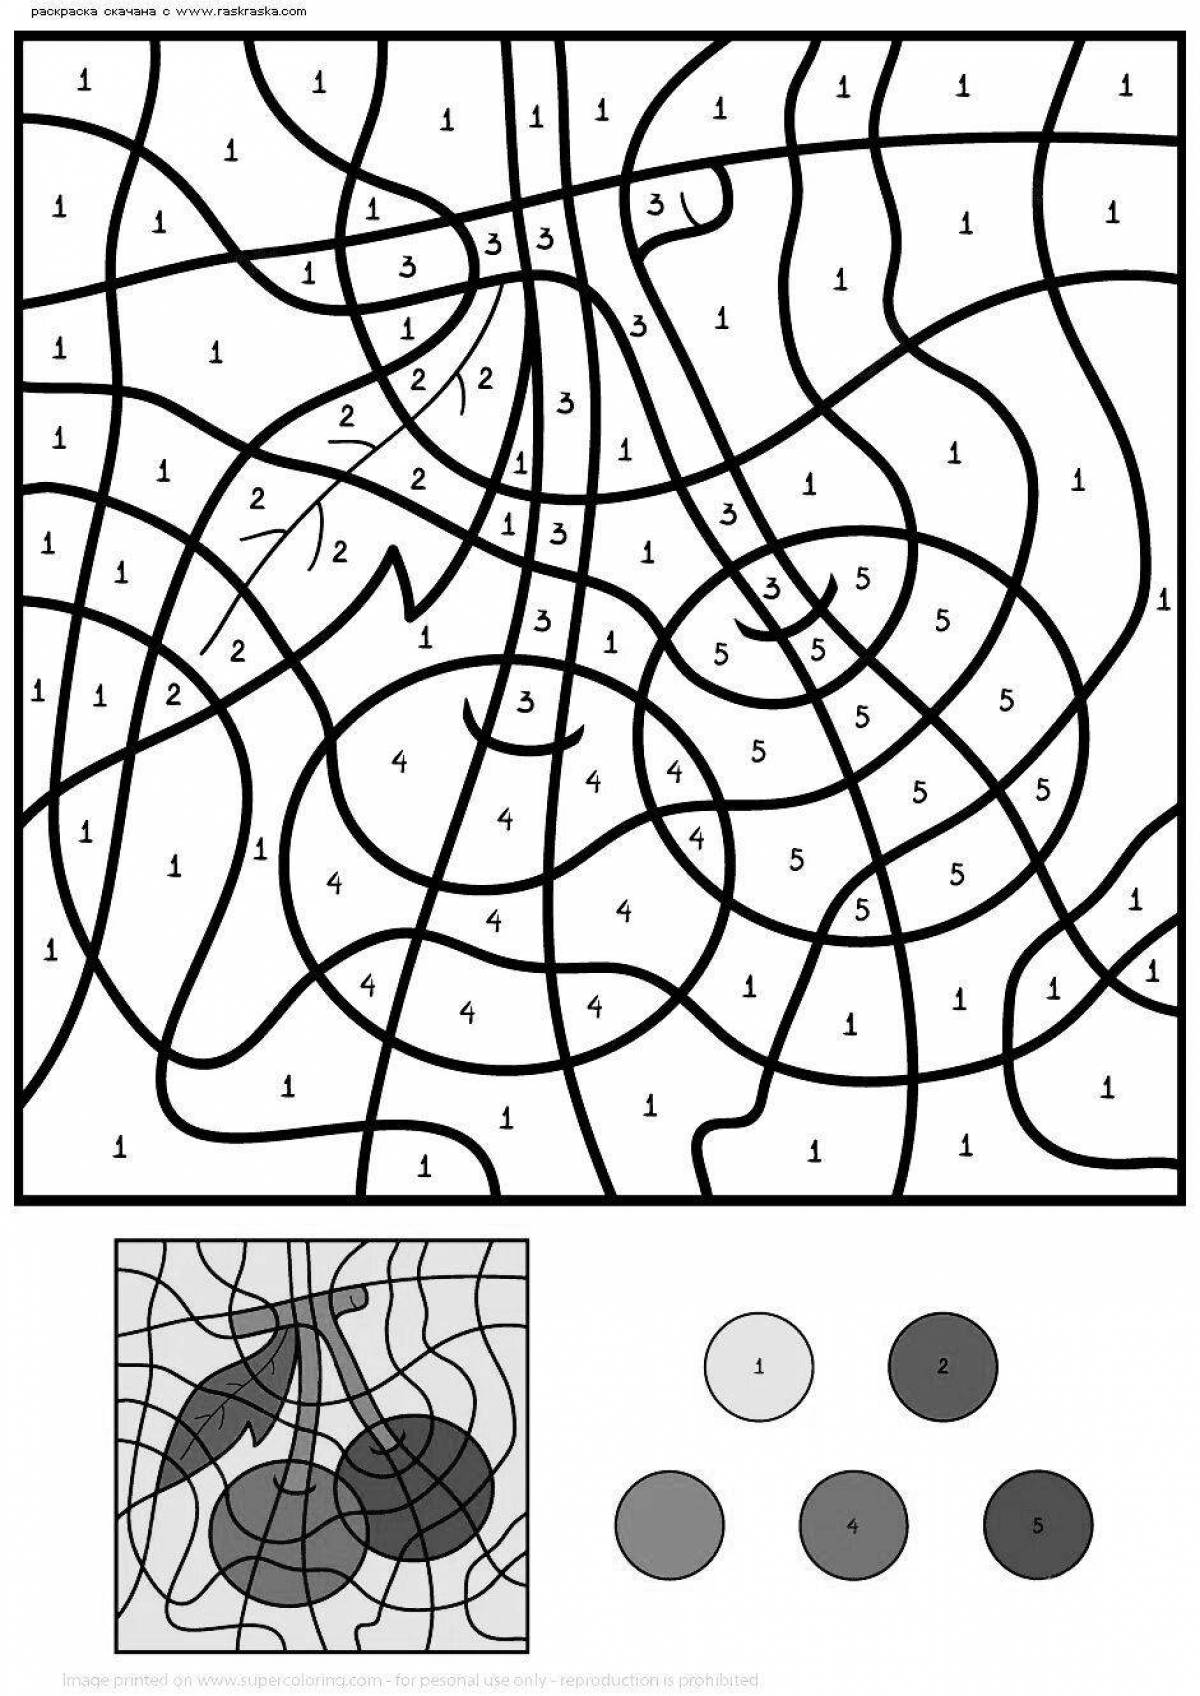 Playful strawberry number coloring game